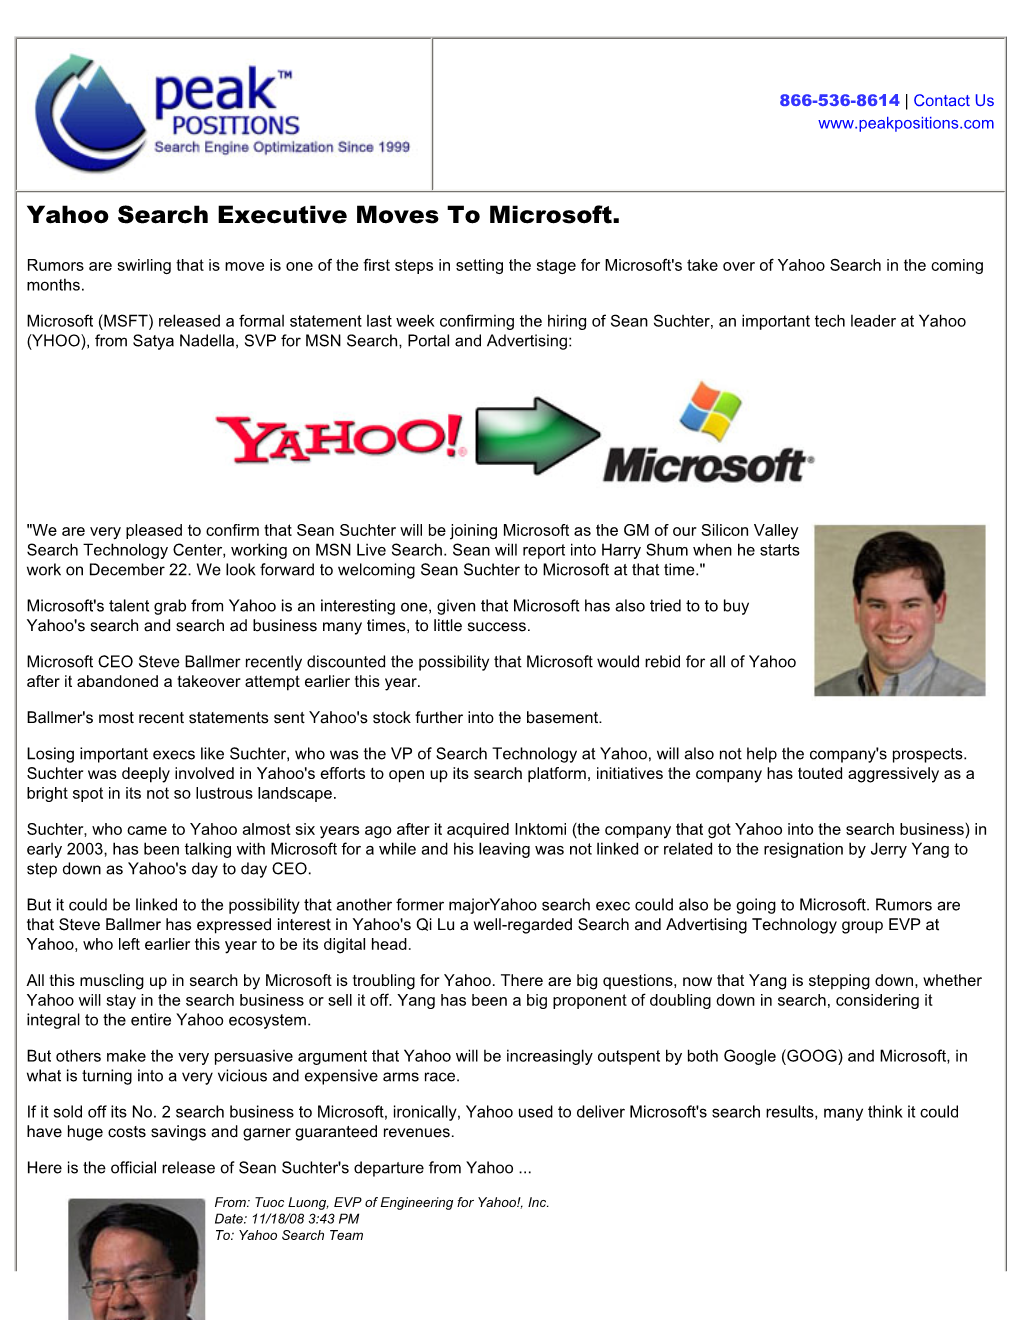 Yahoo Search Executive Moves to Microsoft